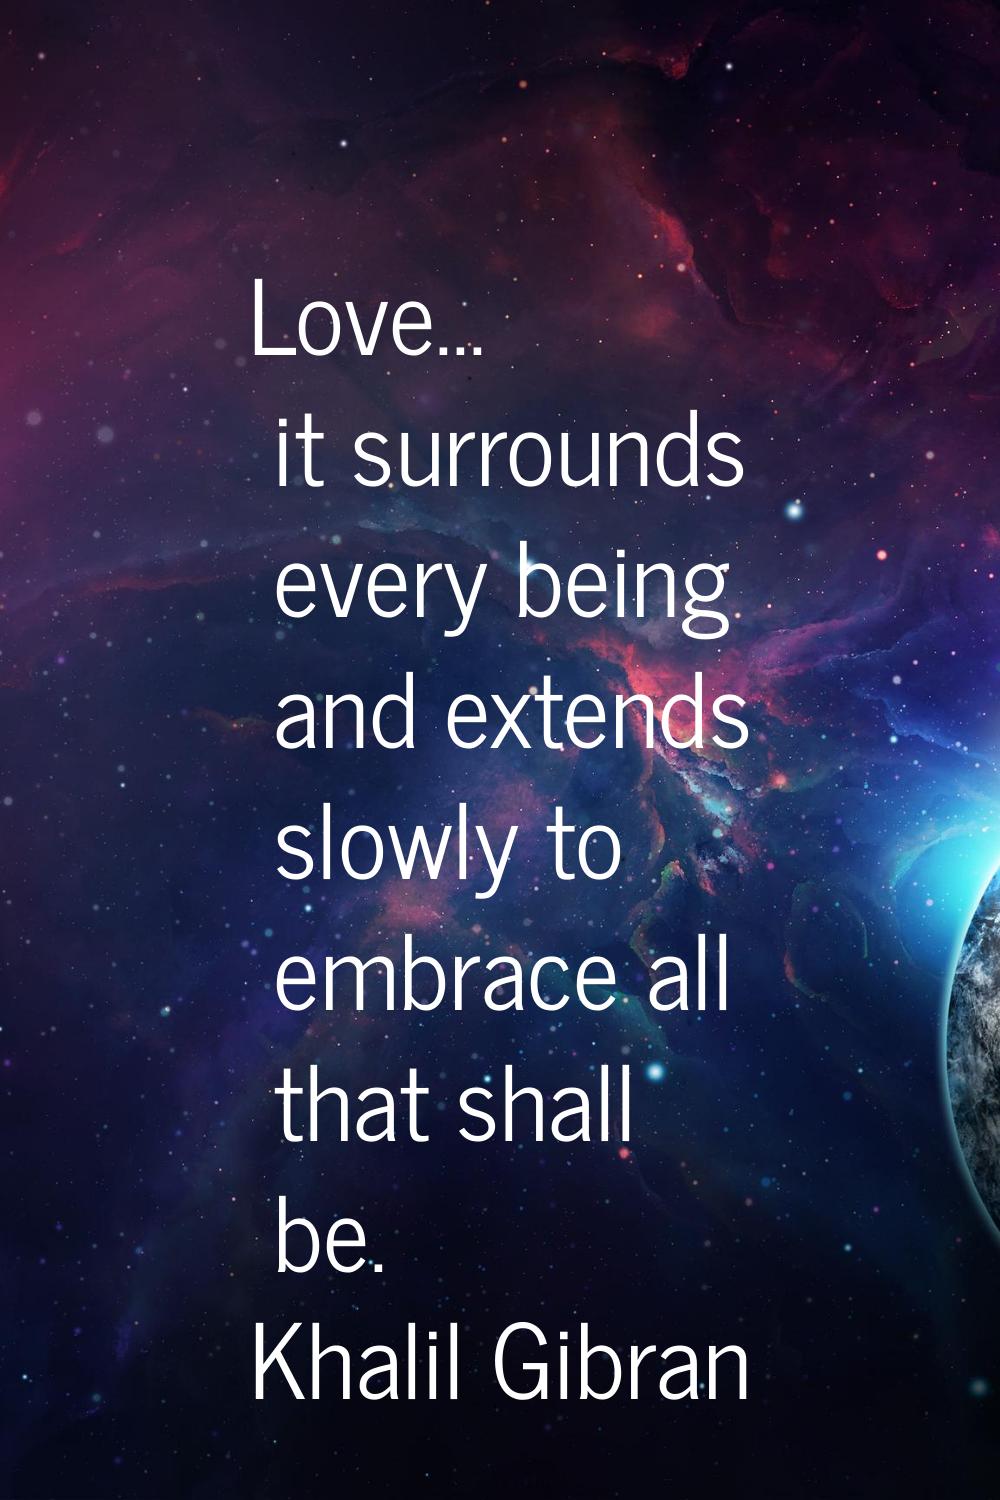 Love... it surrounds every being and extends slowly to embrace all that shall be.